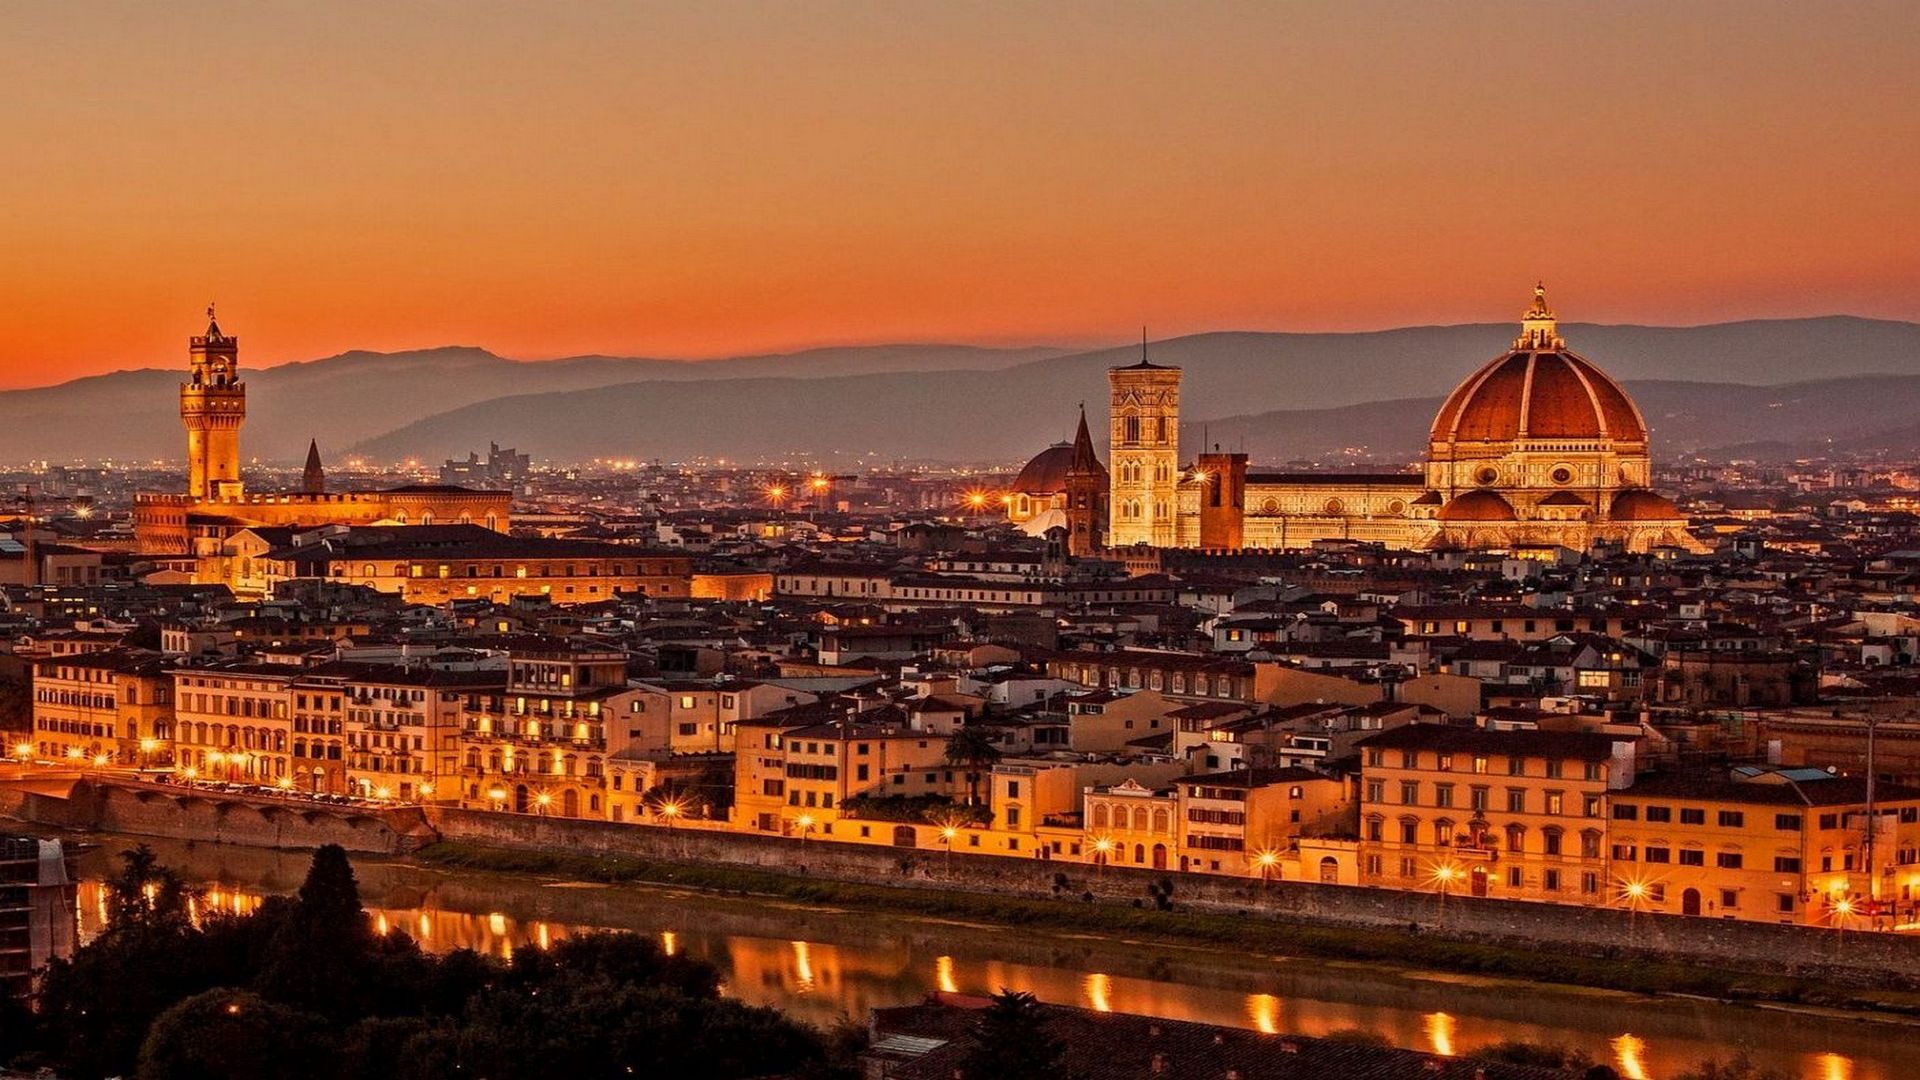 A tour at the sunset of great scenic and historical interest around the Oltrarno hills, around the city of Florence